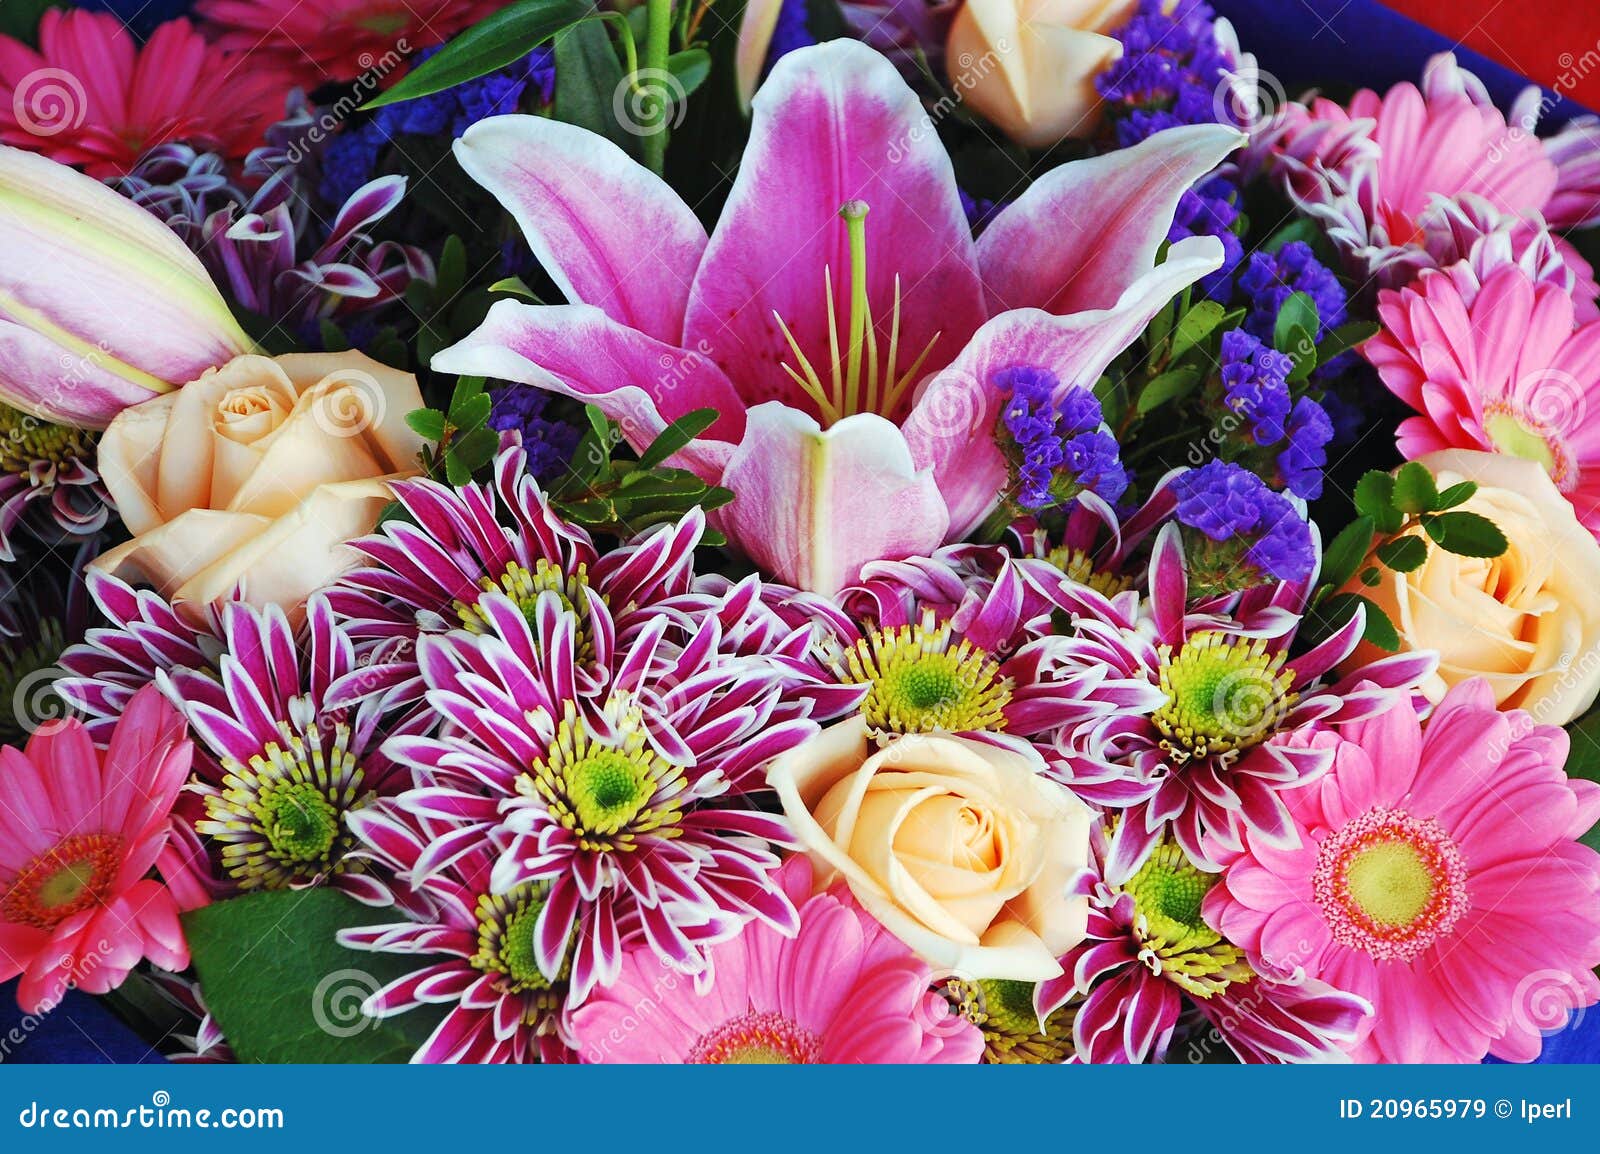 Pink floral bouquet stock image. Image of blooms, spring - 20965979